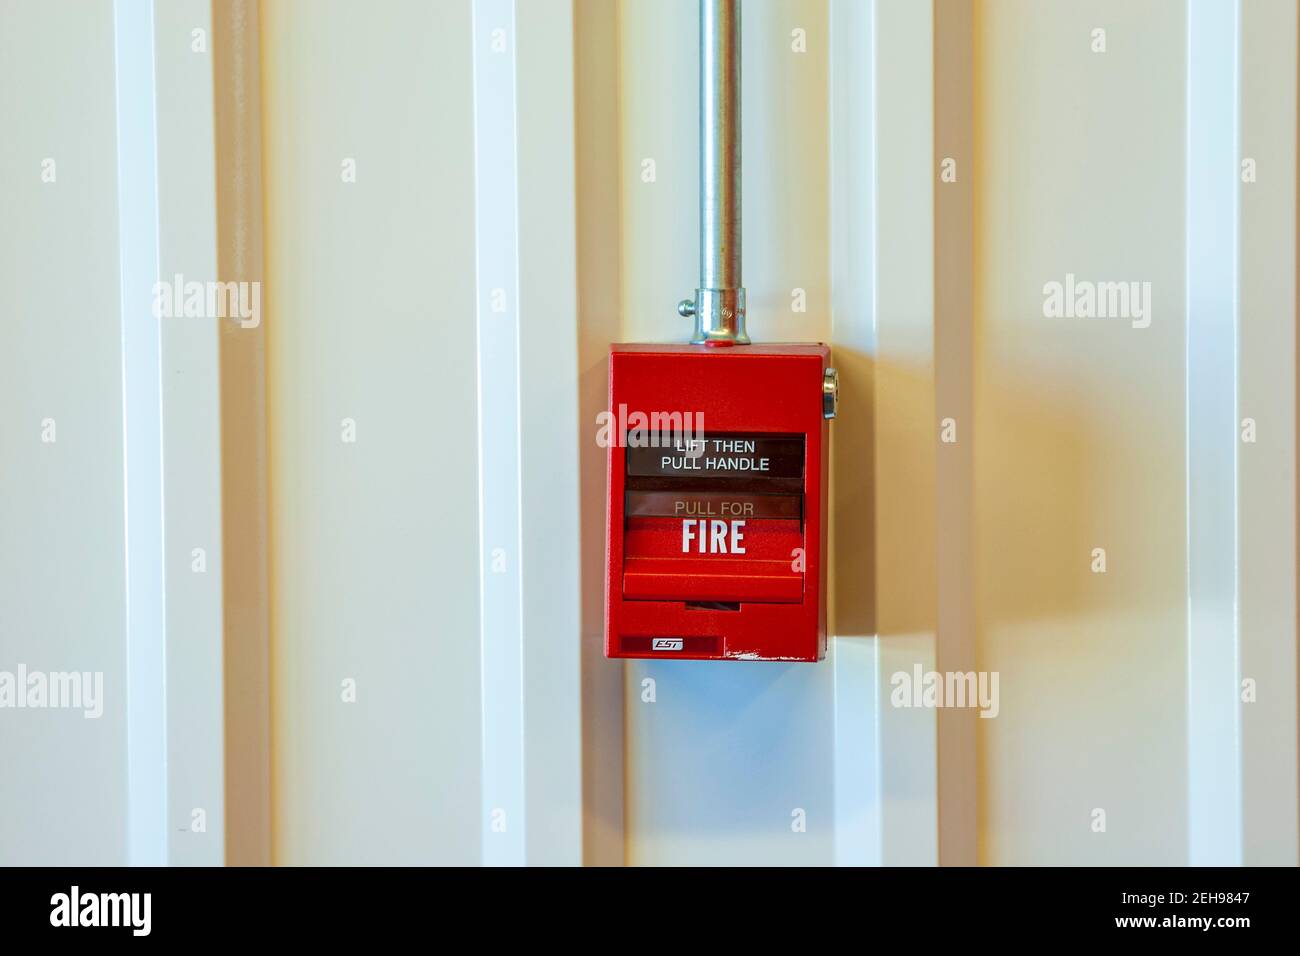 Fire alarm switch to pull in case of fire Stock Photo